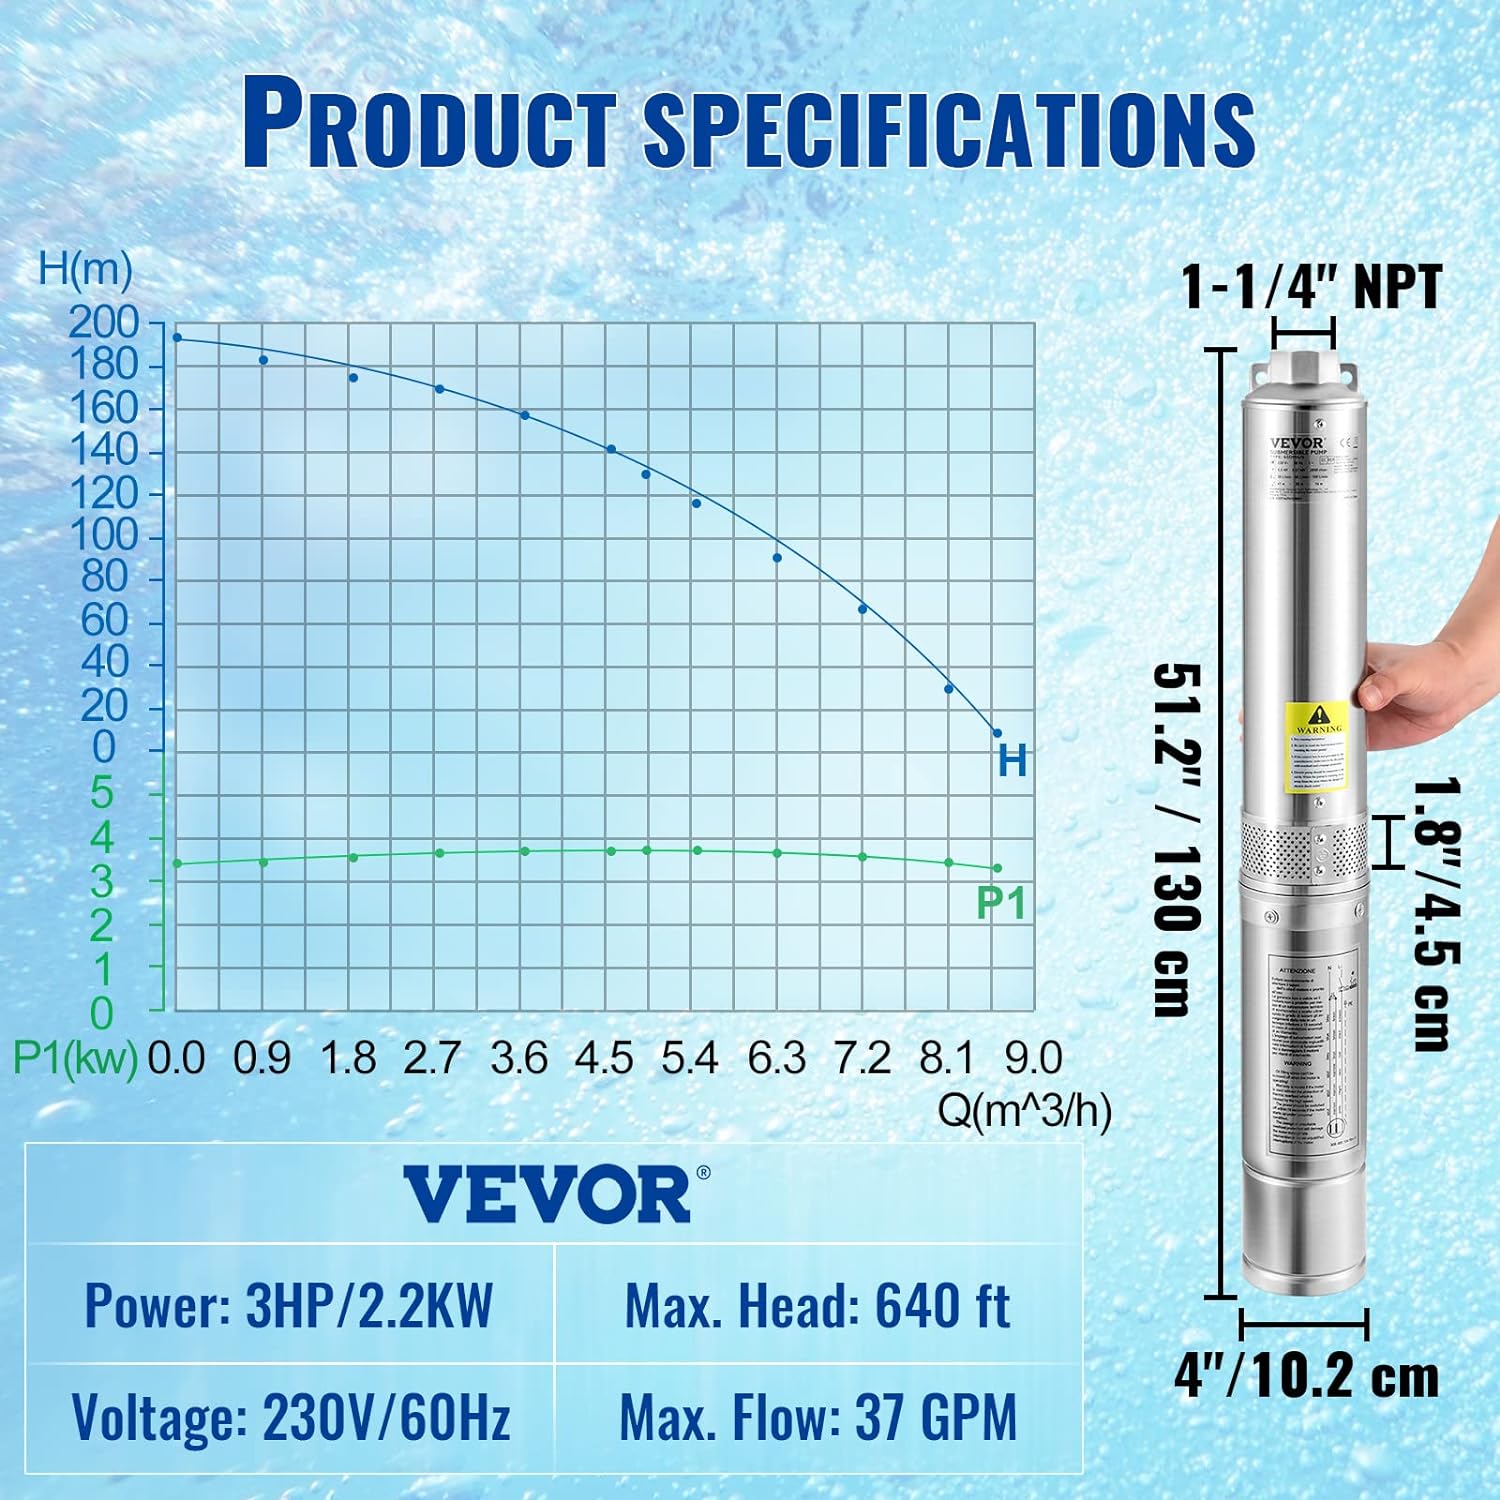 VEVOR Deep Well Submersible Pump, 3HP 230V/60Hz, 37GPM 640 ft Head, with 33 ft Cord  External Control Box, 4 inch Stainless Steel Water Pumps for Industrial, Irrigation and Home Use, IP68 Waterproof